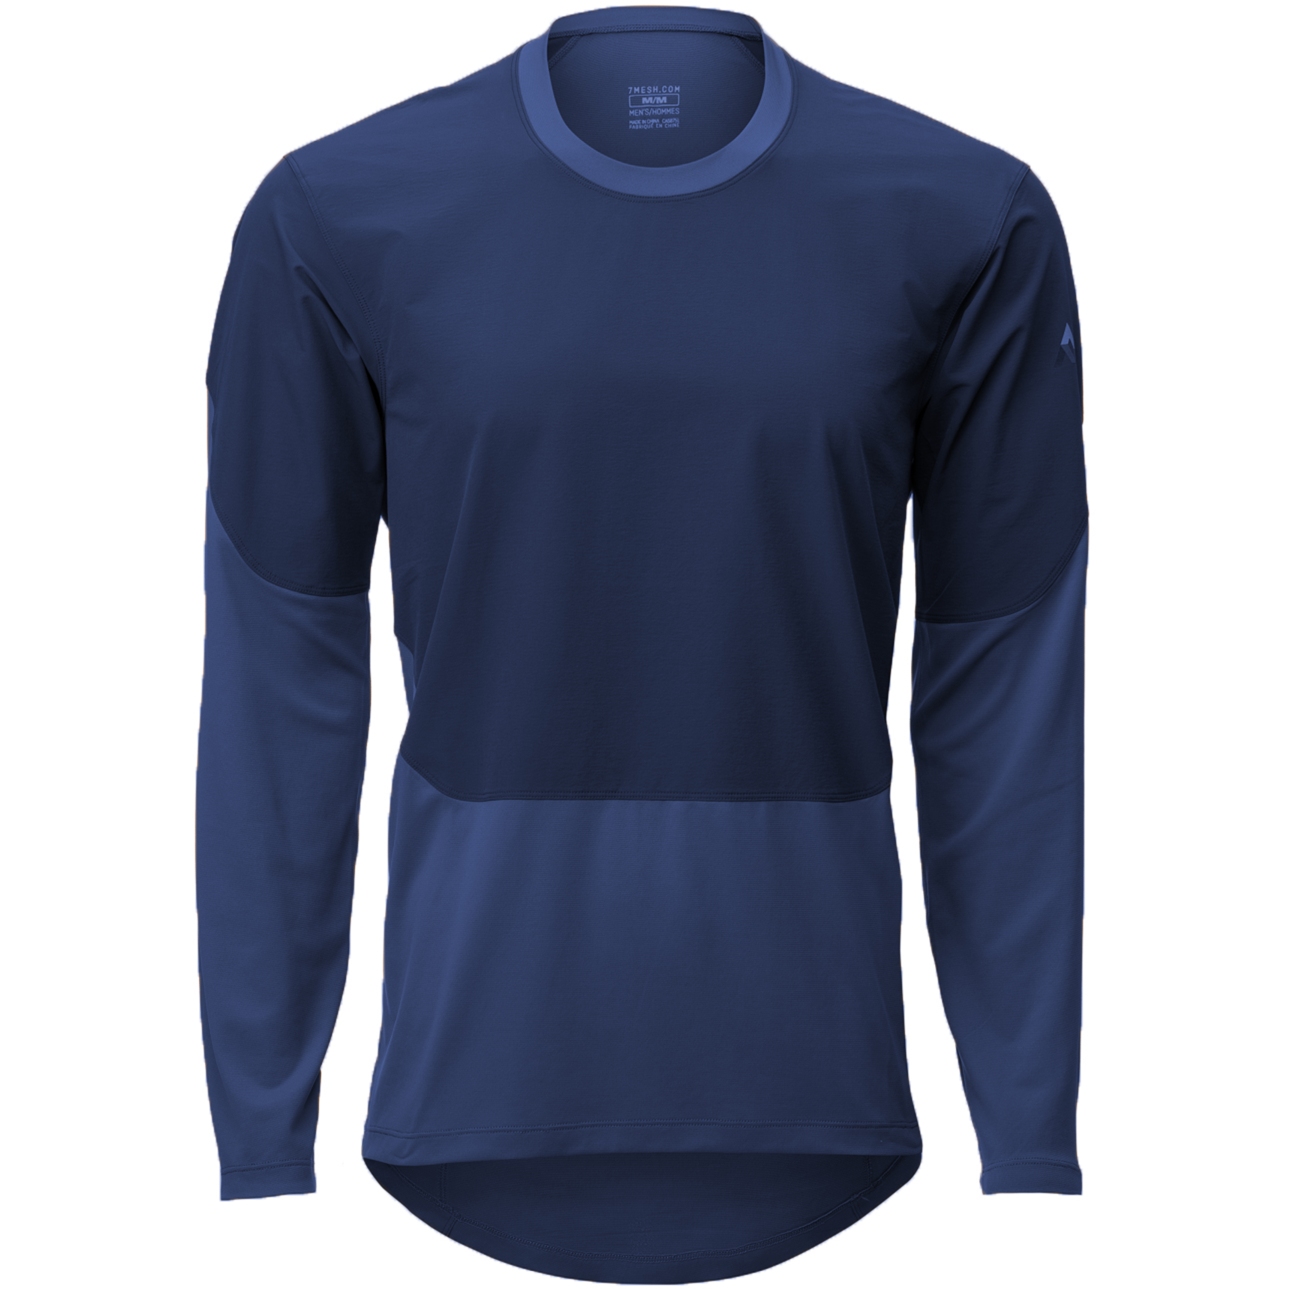 Picture of 7mesh Compound Long Sleeve Shirt - Cadet Blue